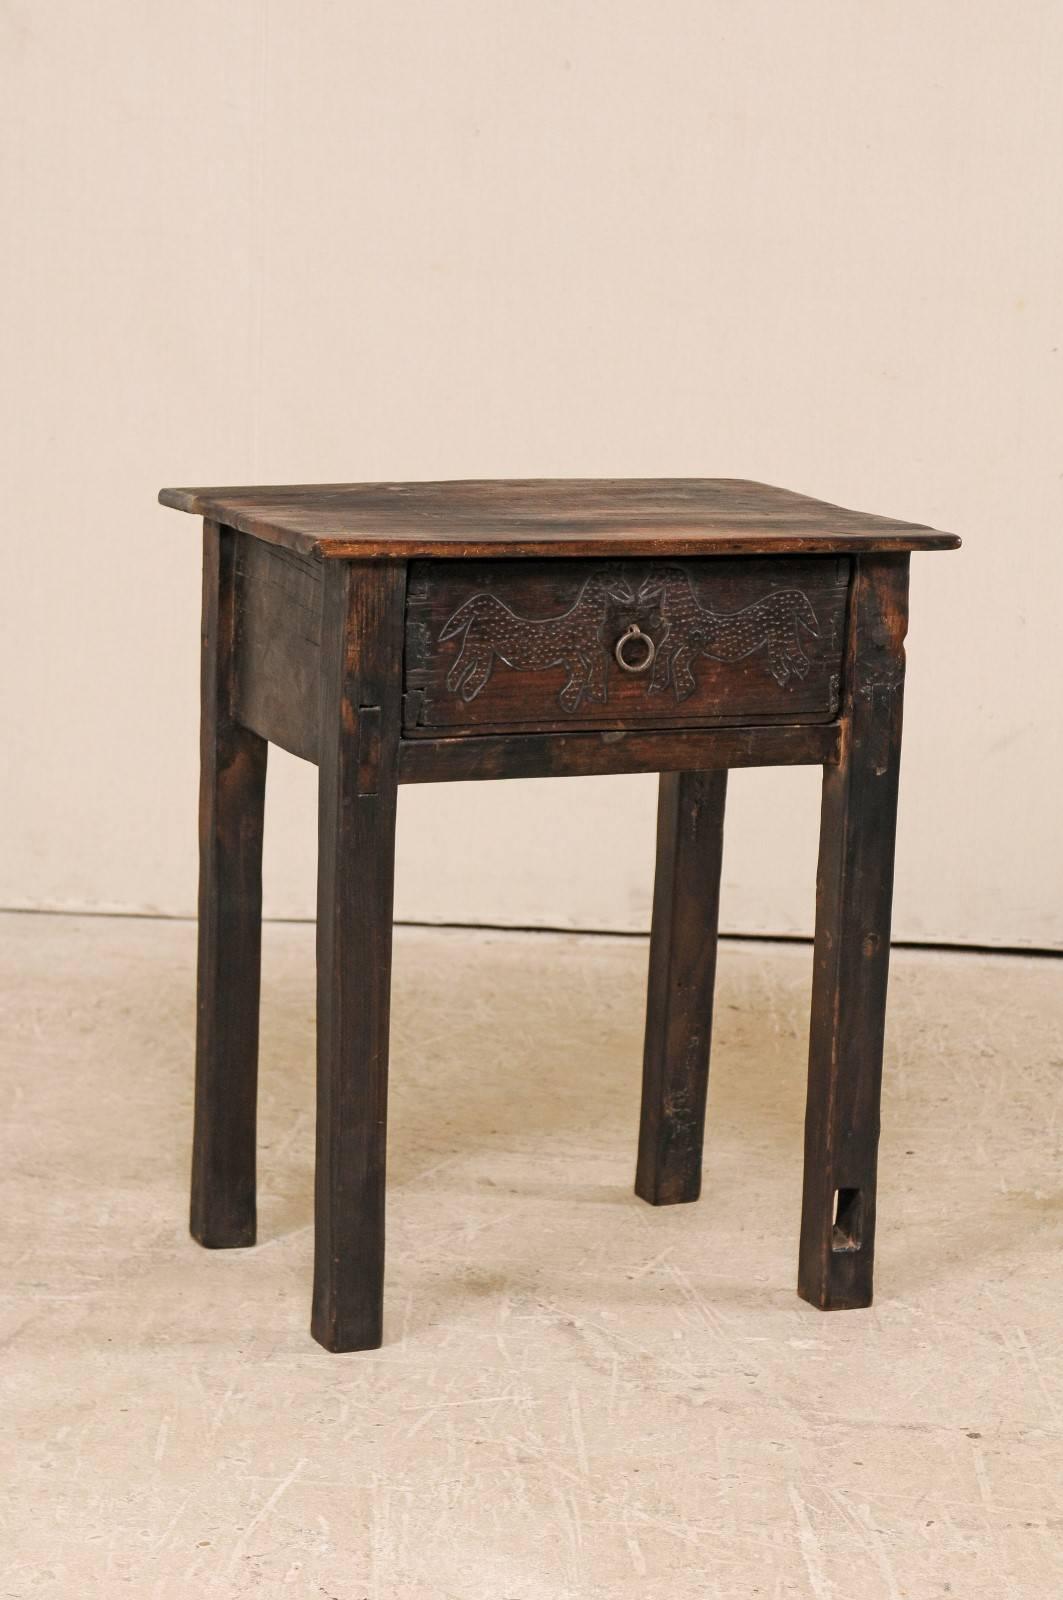 A Guatemalan side table from the early 20th century. This Guatemalan rectangular-shaped side table features a single drawer, which has two primitively carved horses, decorated with punched dotting, facing each other and a simple ring pull between